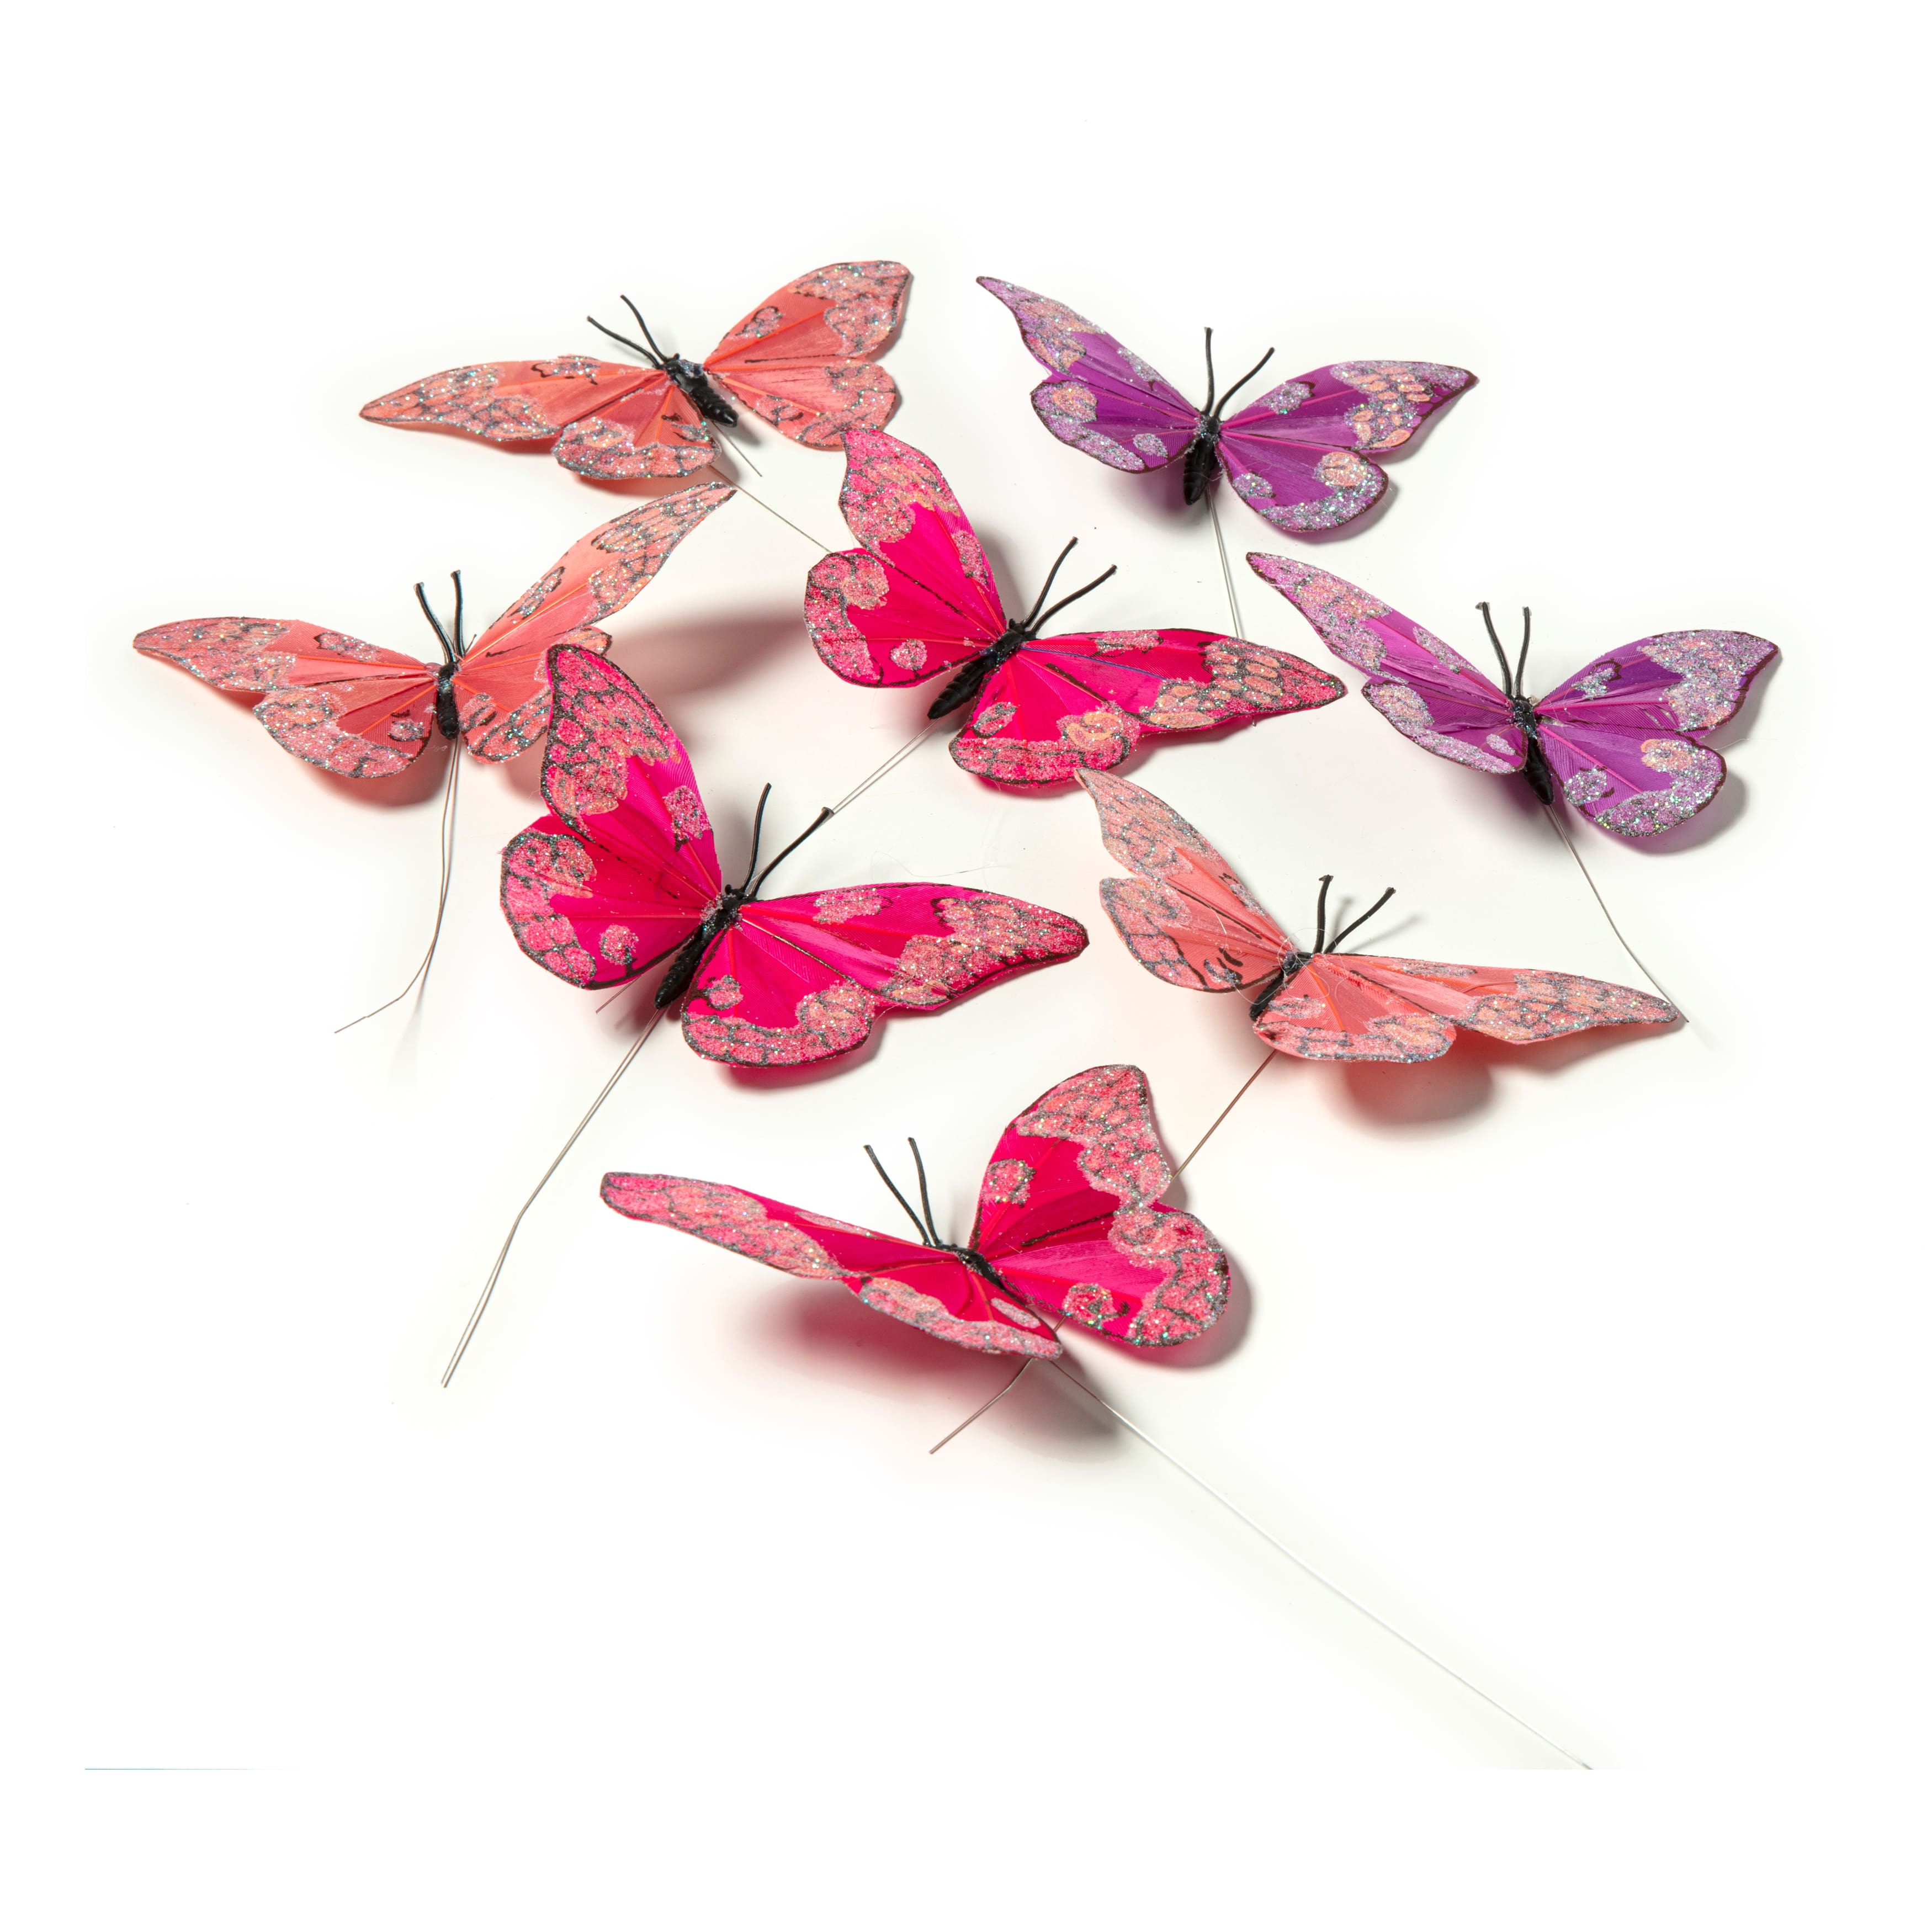 3 LARGE CLIP ON GLITTERED BUTTERFLIES EASTER FLORAL WEDDING CRAFTS DECORATION 